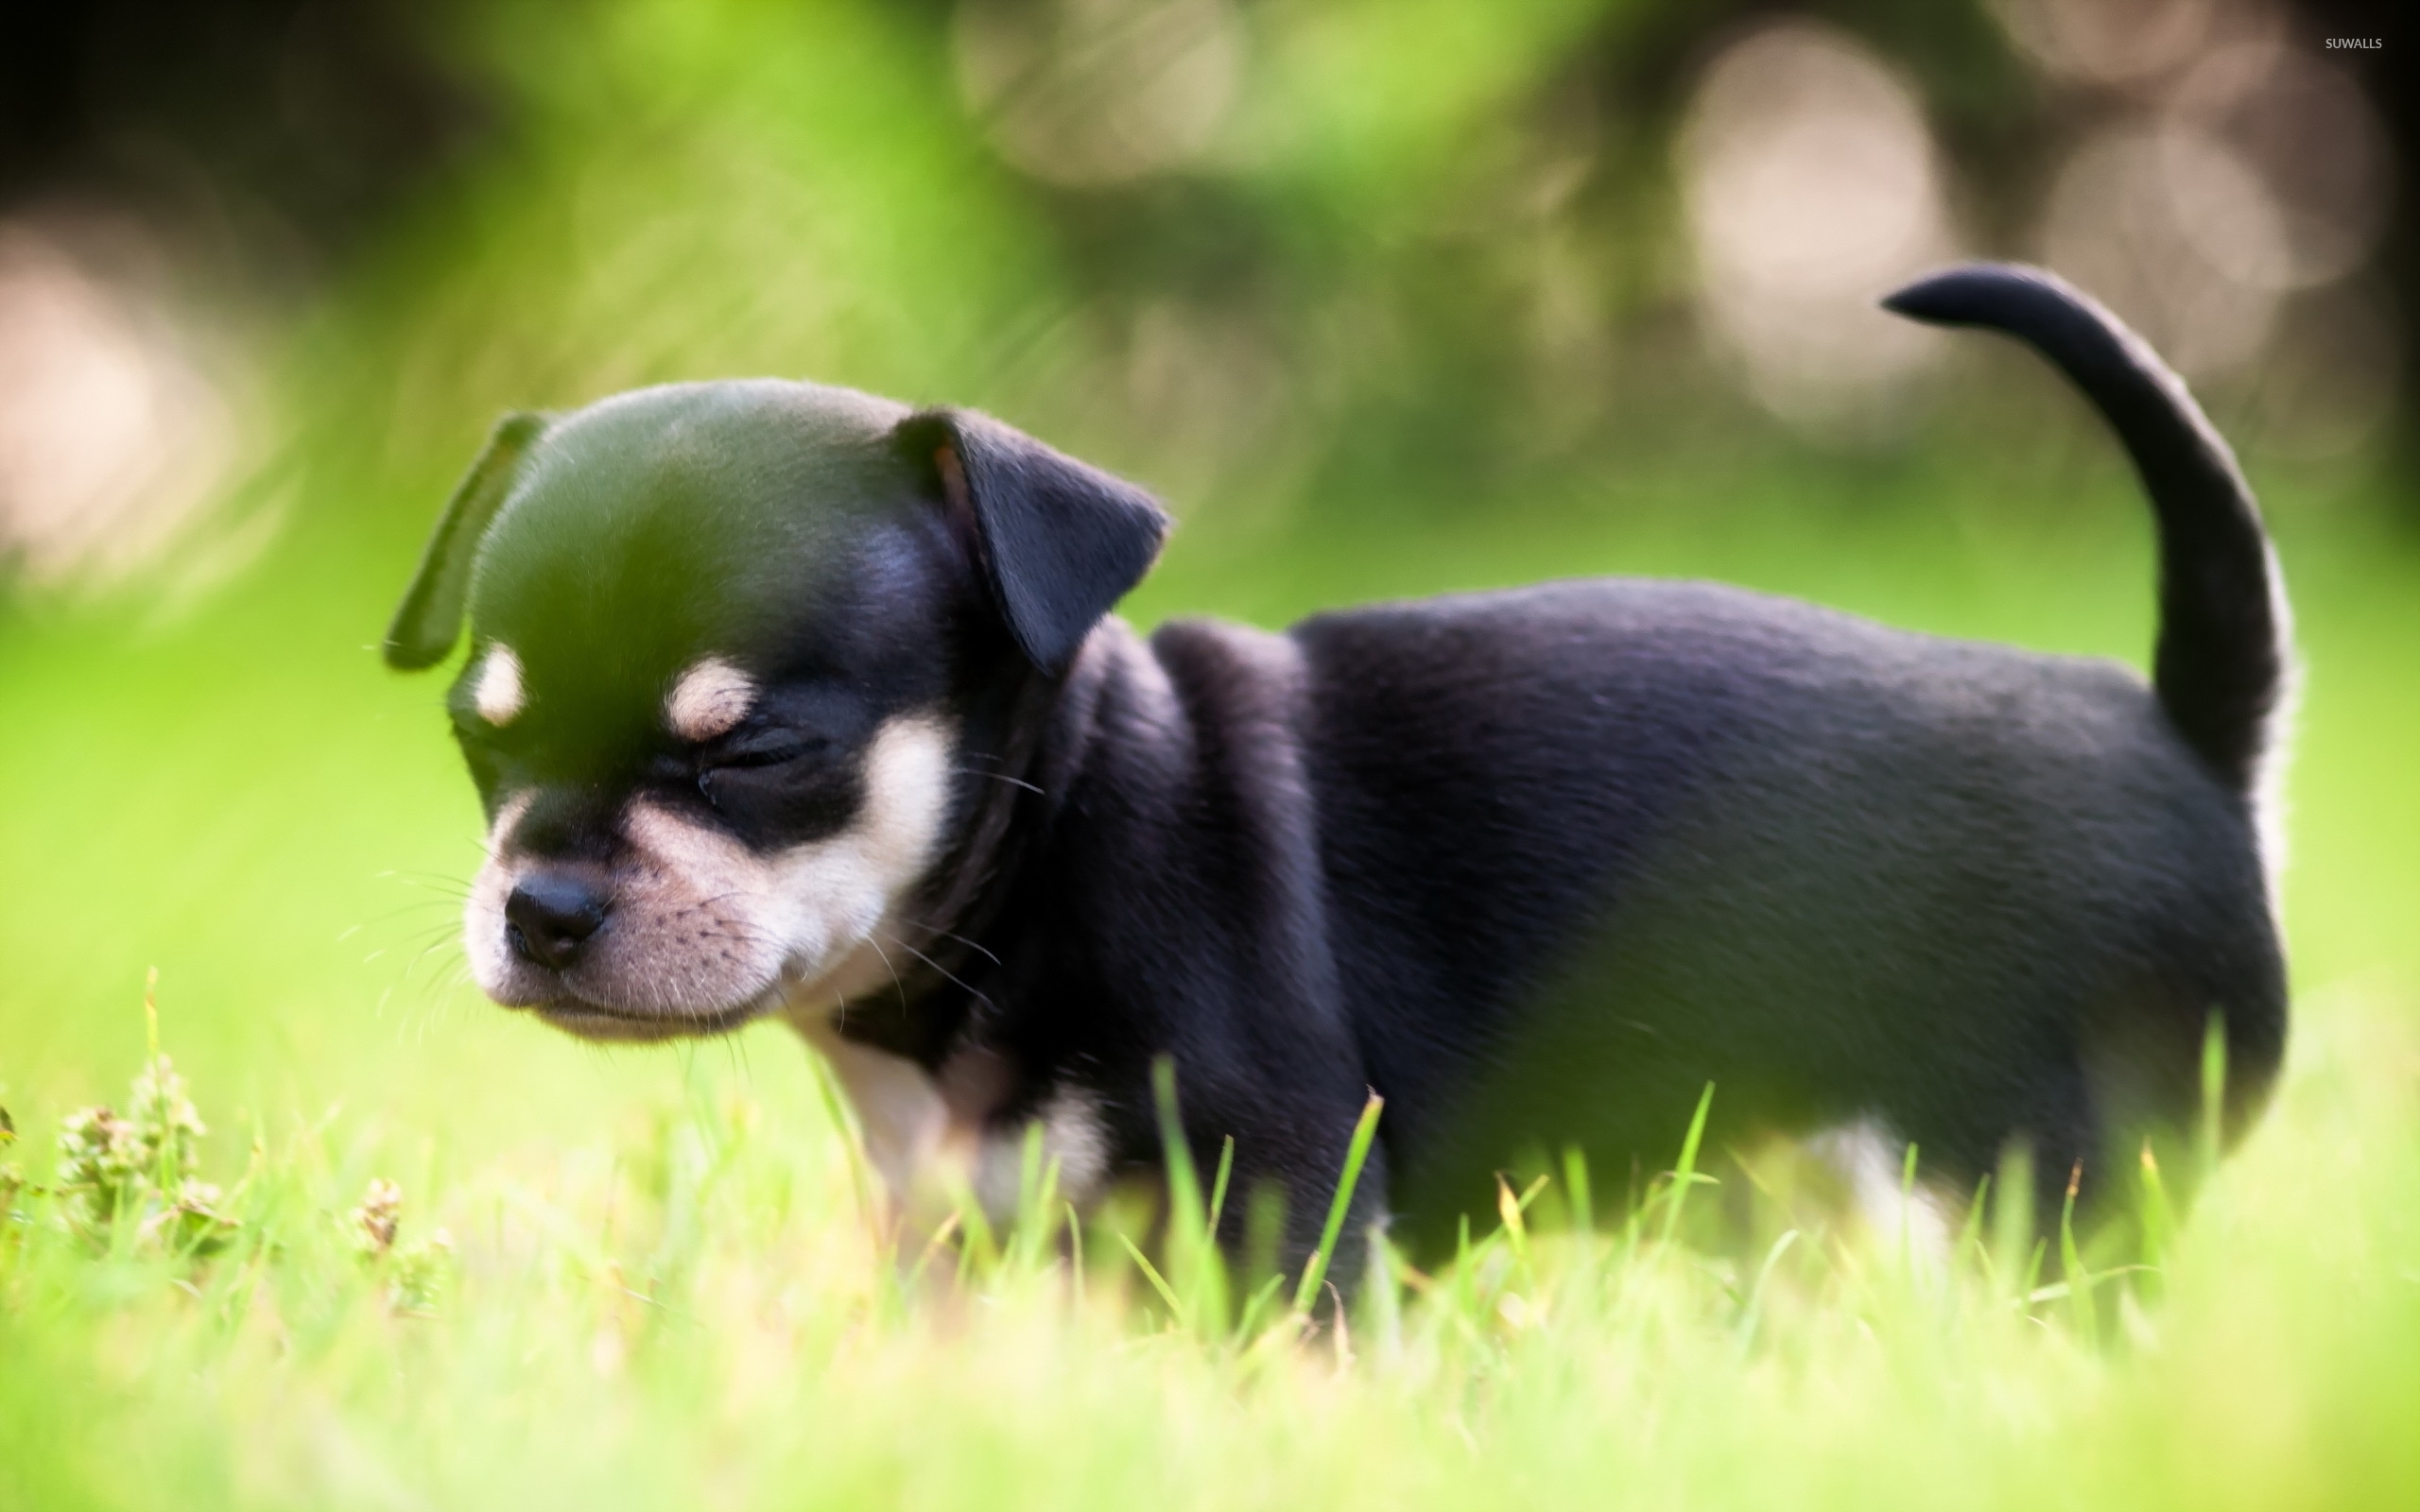 Cute black puppy in the grass wallpaper - Animal wallpapers - #49169